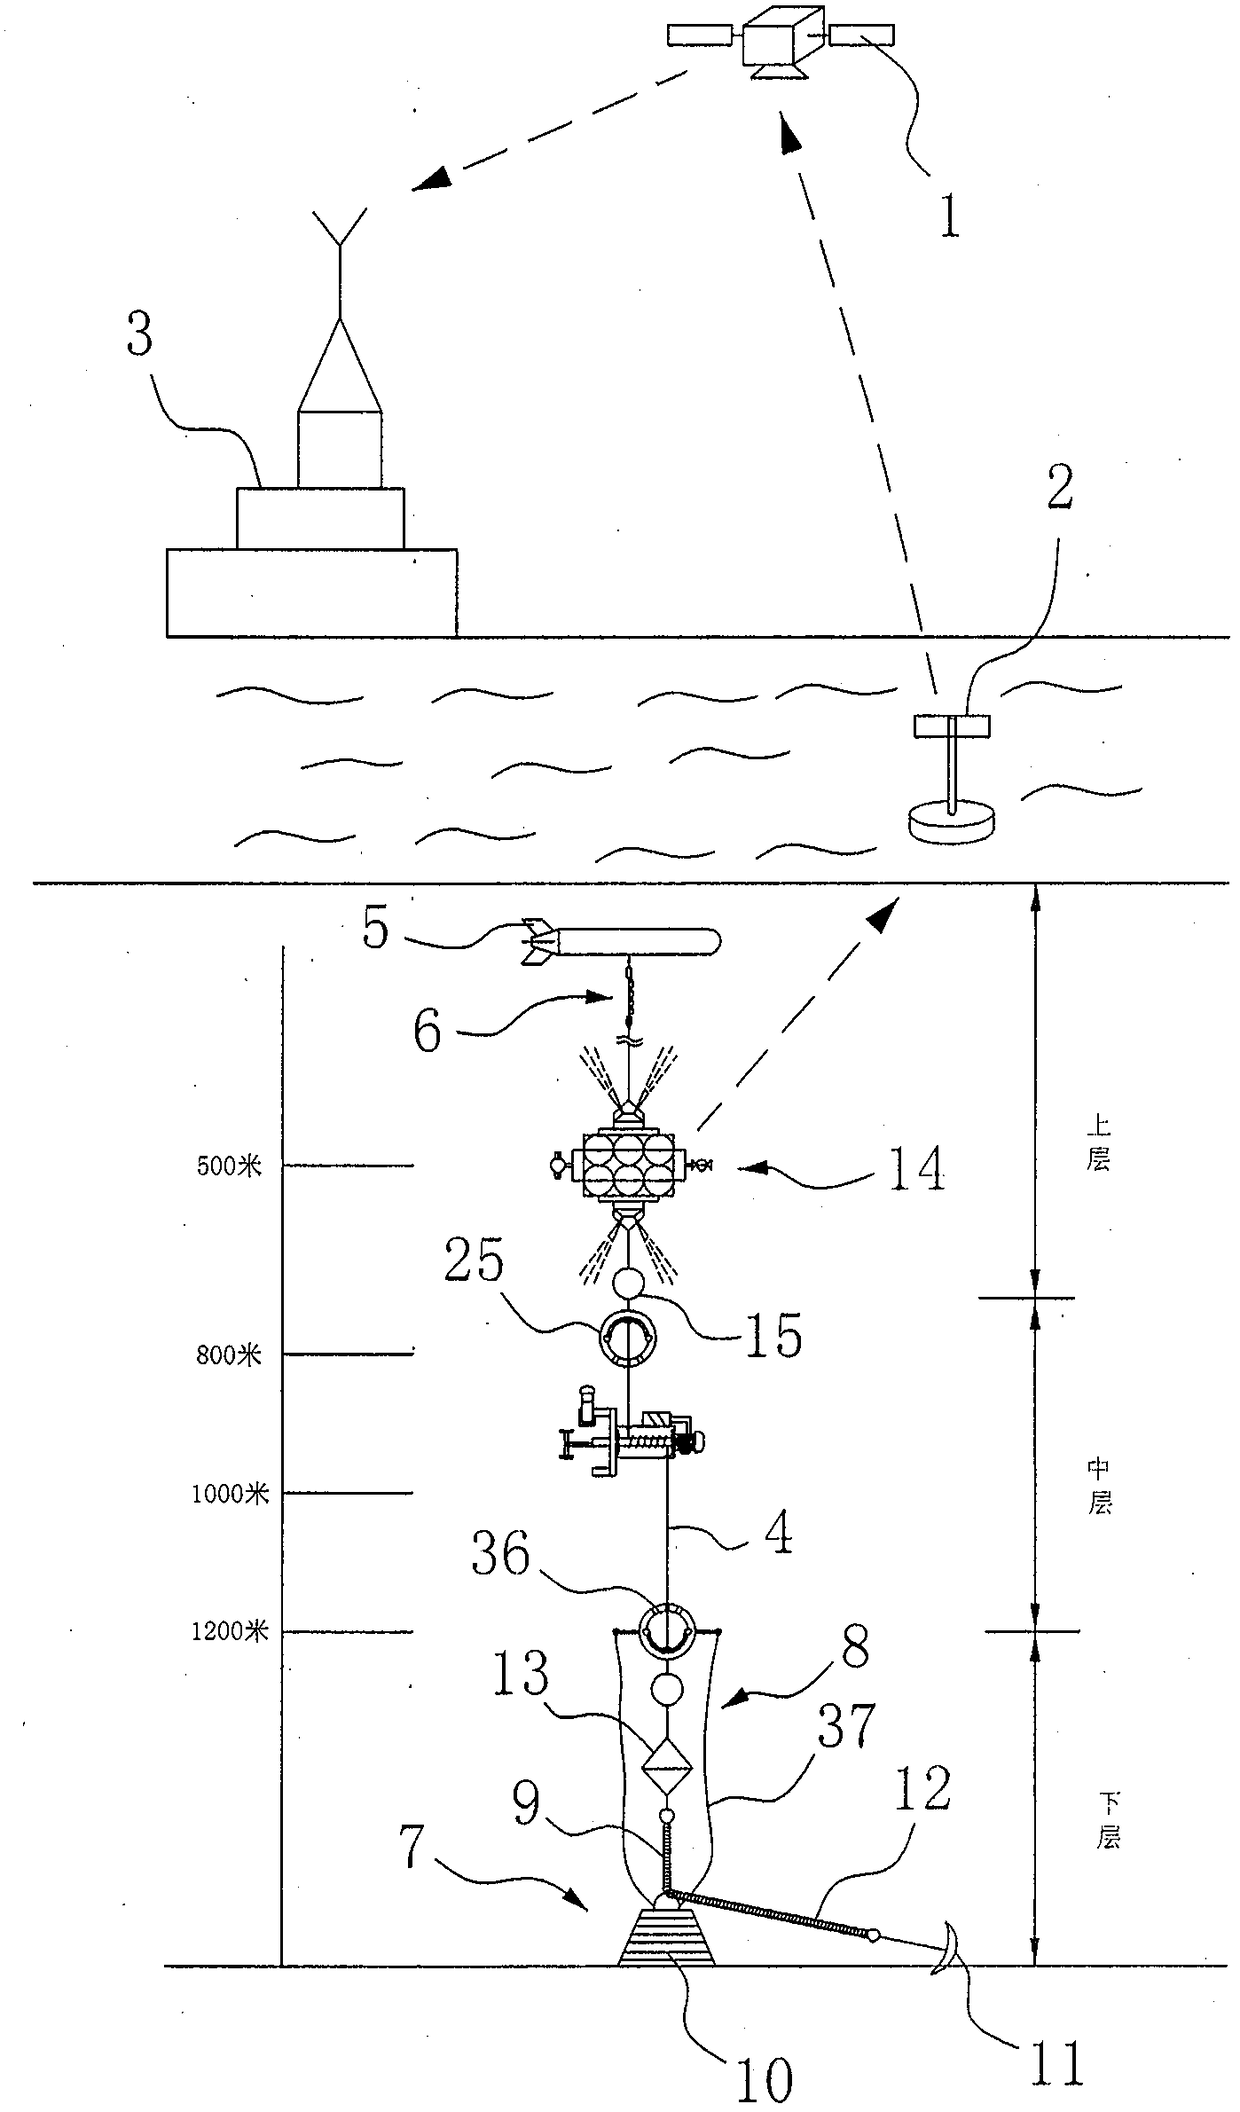 Deep-sea anchor-system subsurface-buoy system based on satellite communication data real-time transmission